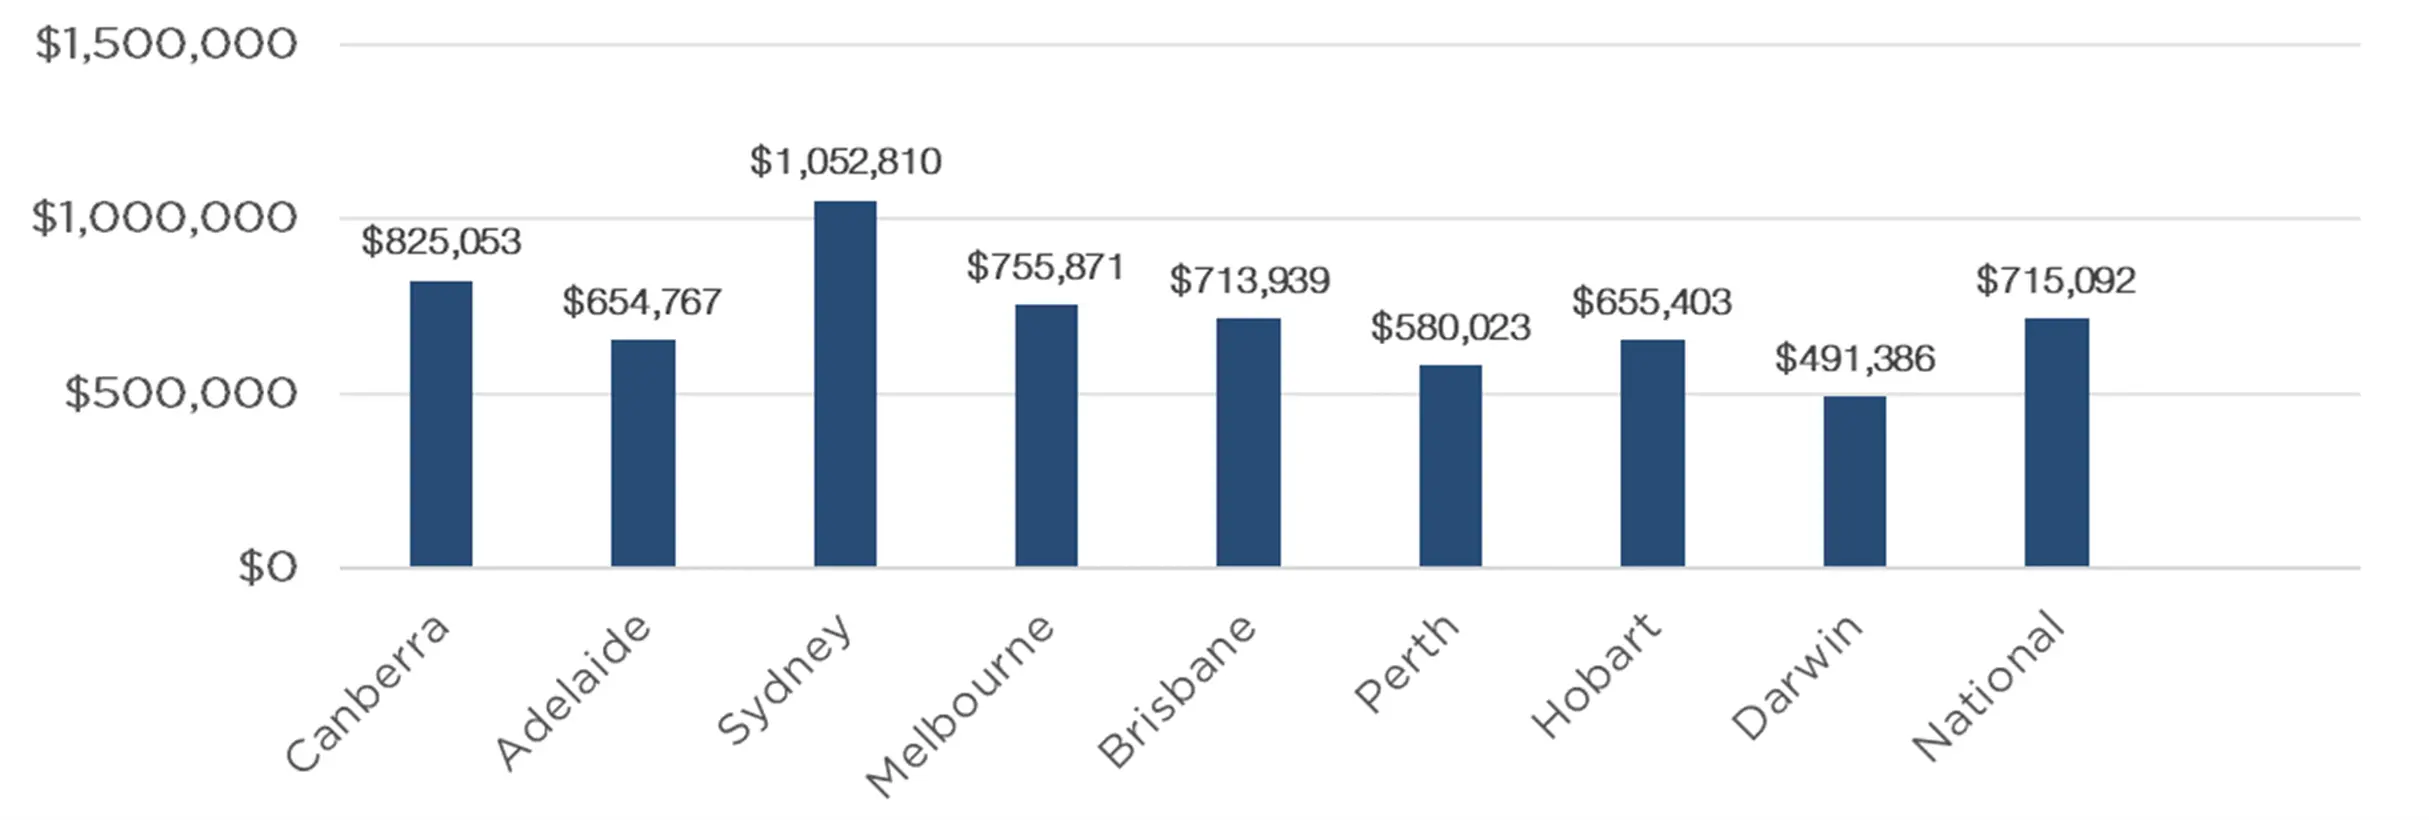 Corelogic's median dwelling values by capital city plotted on a bar graph.